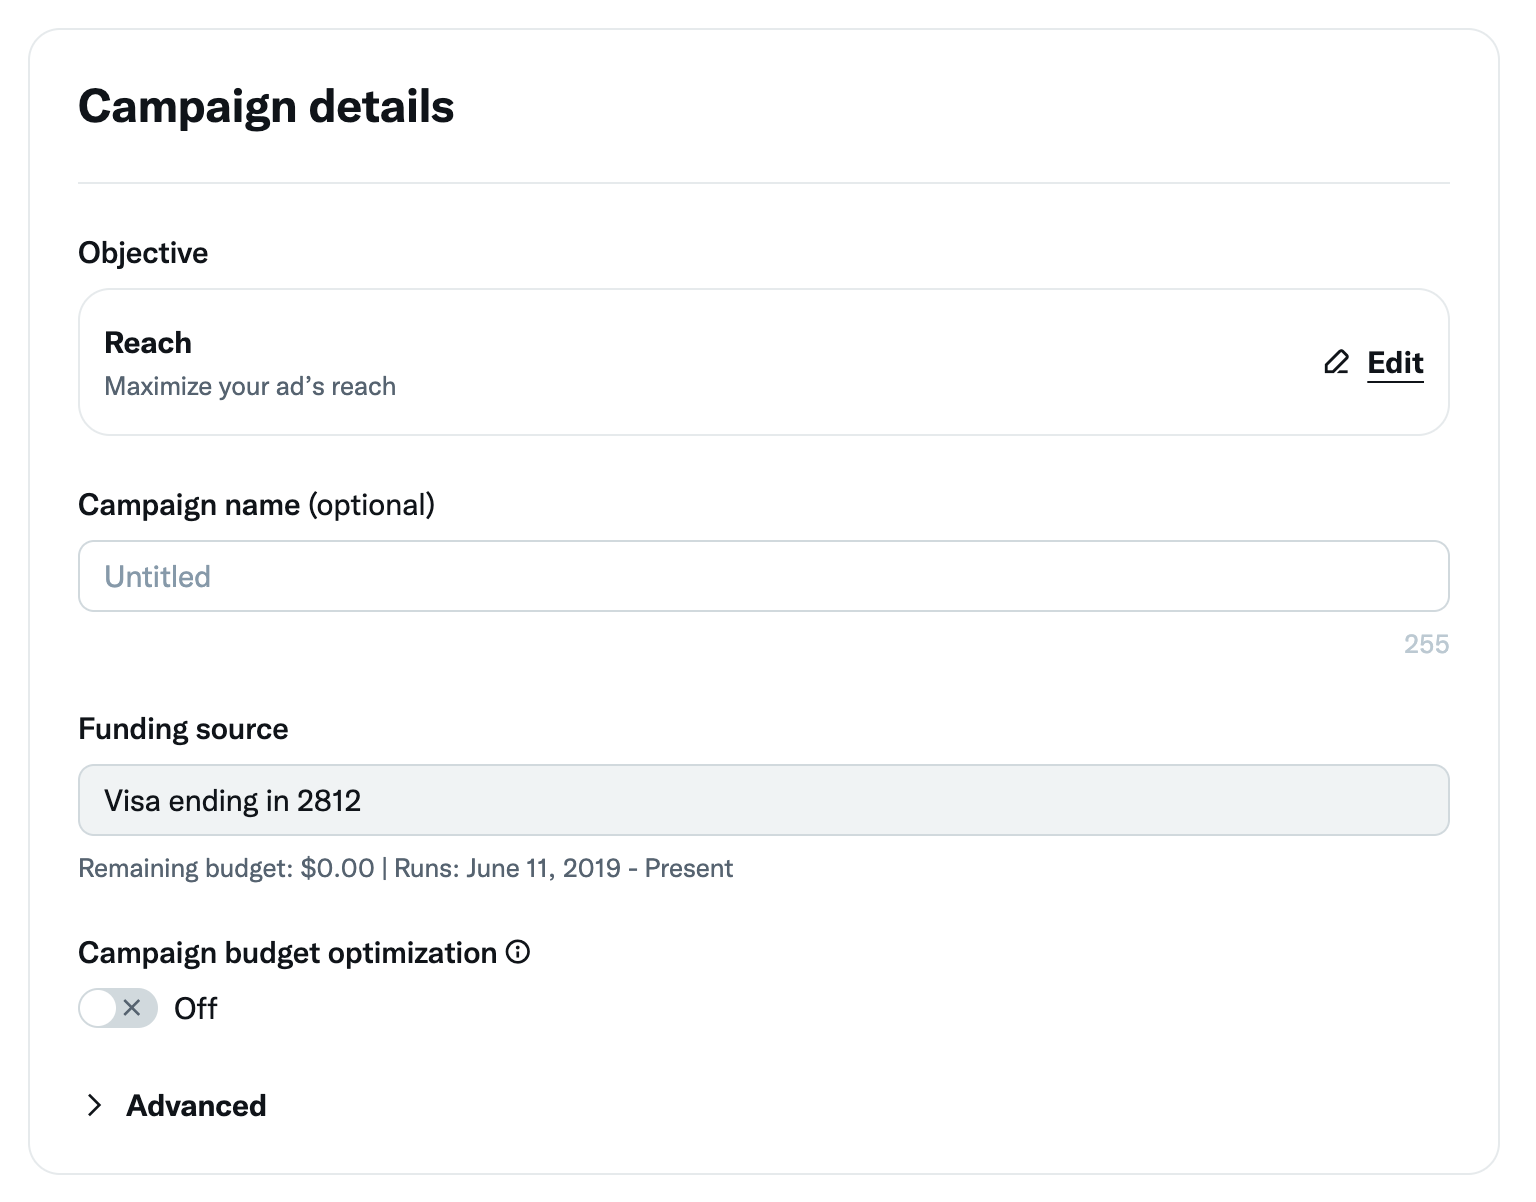 A screenshot of the Twitter ad interface's campaign details page, where users can define the objective, reach, campaign name, funding source, campaign budget optimization and advanced settings of a campaign.